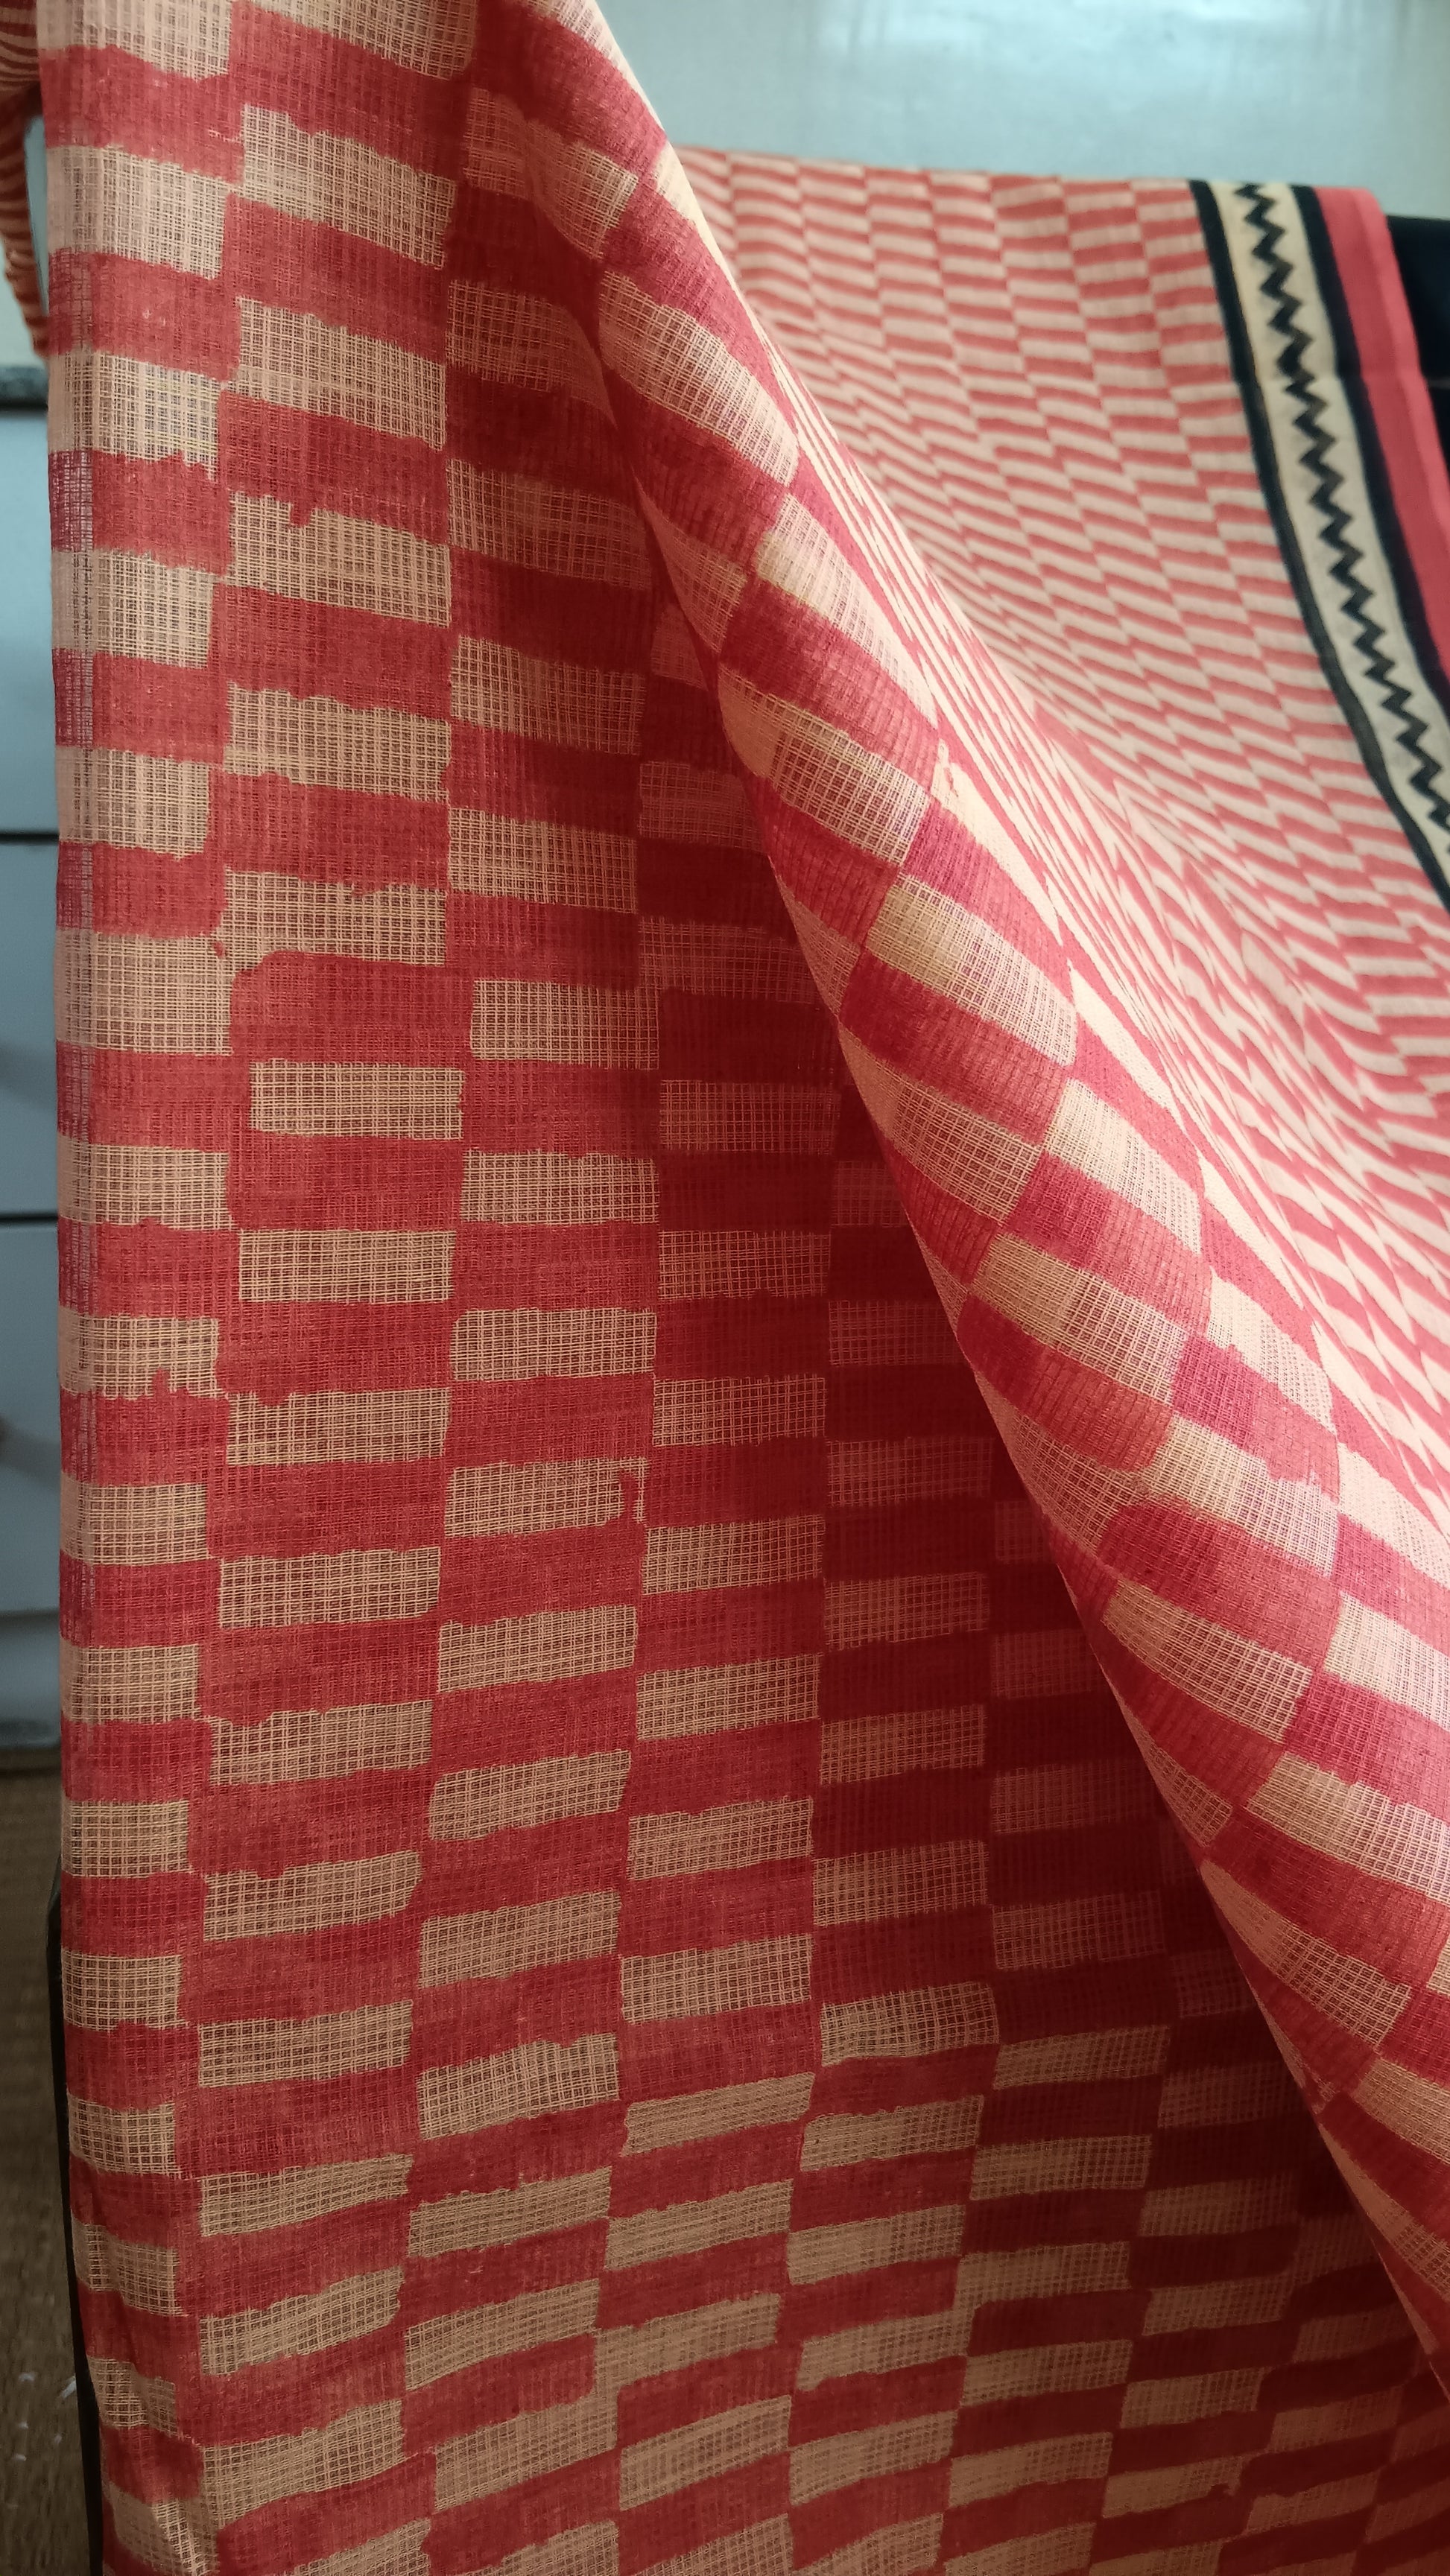 Close up view of the red checks block printed on the body of a daily wear kota cotton saree